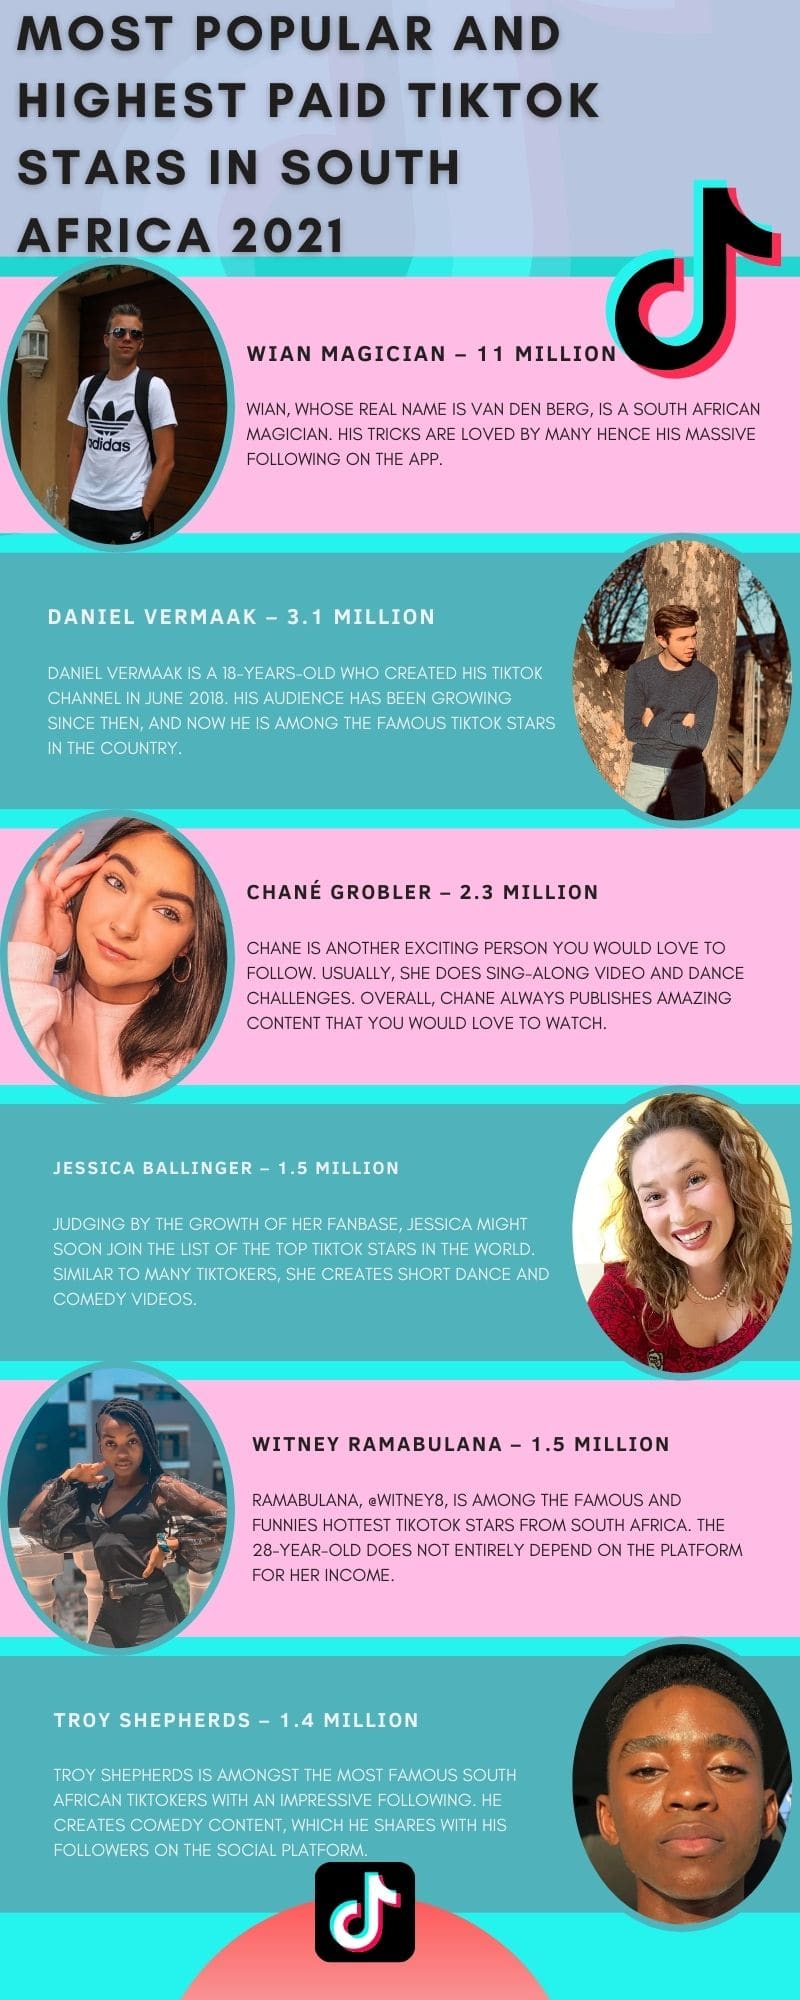 List Of The Most Popular And Highest Paid Tiktok Stars In South Africa 2021